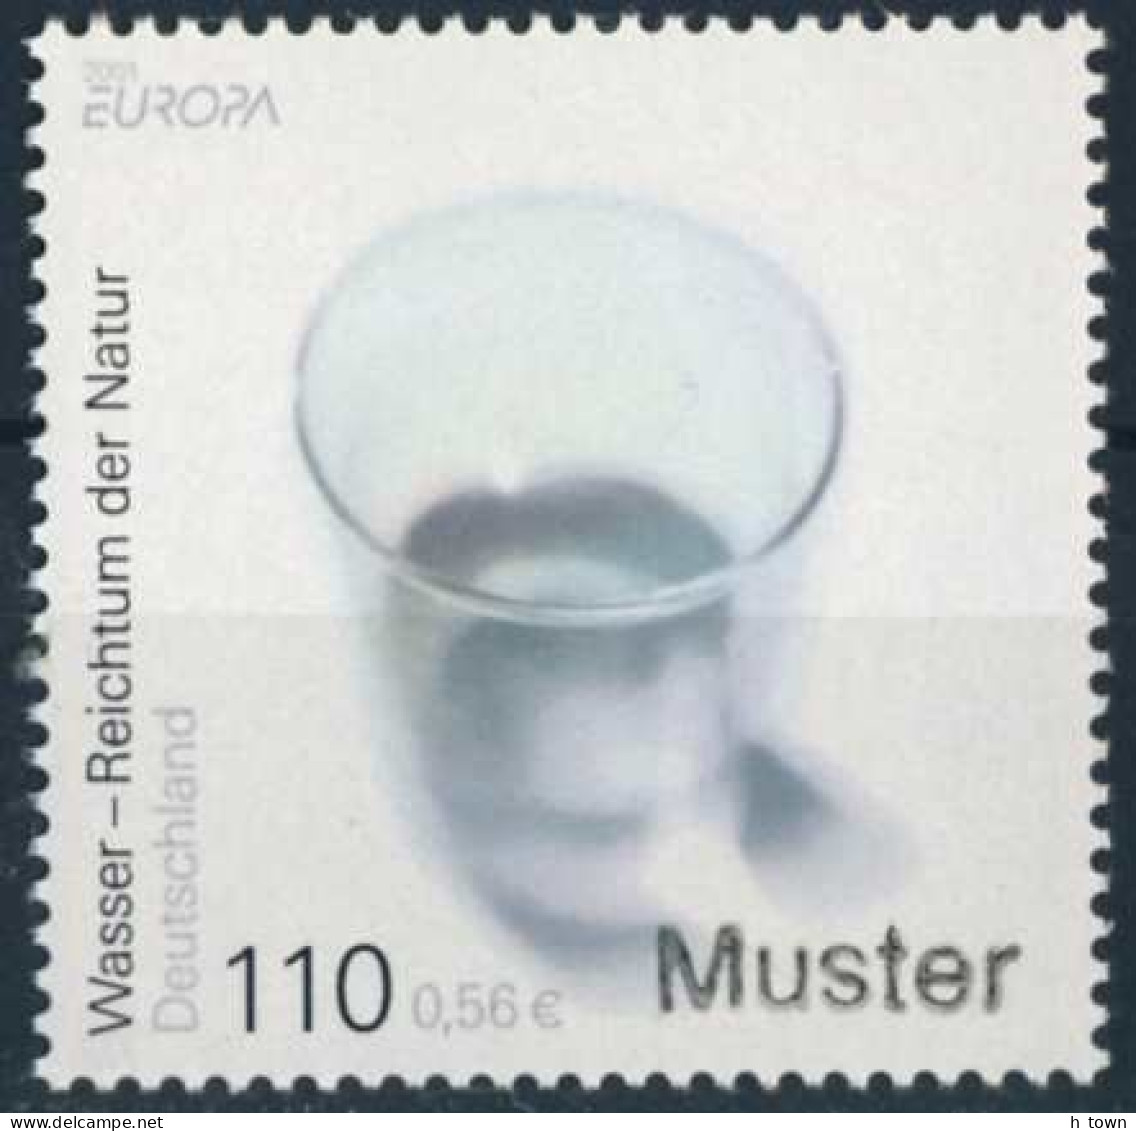 954  Europa CEPT 2001 Eau: Timbre Spécimen "Muster" D'Allemagne - Europe, Water: Specimen-stamp From Germany - 2001